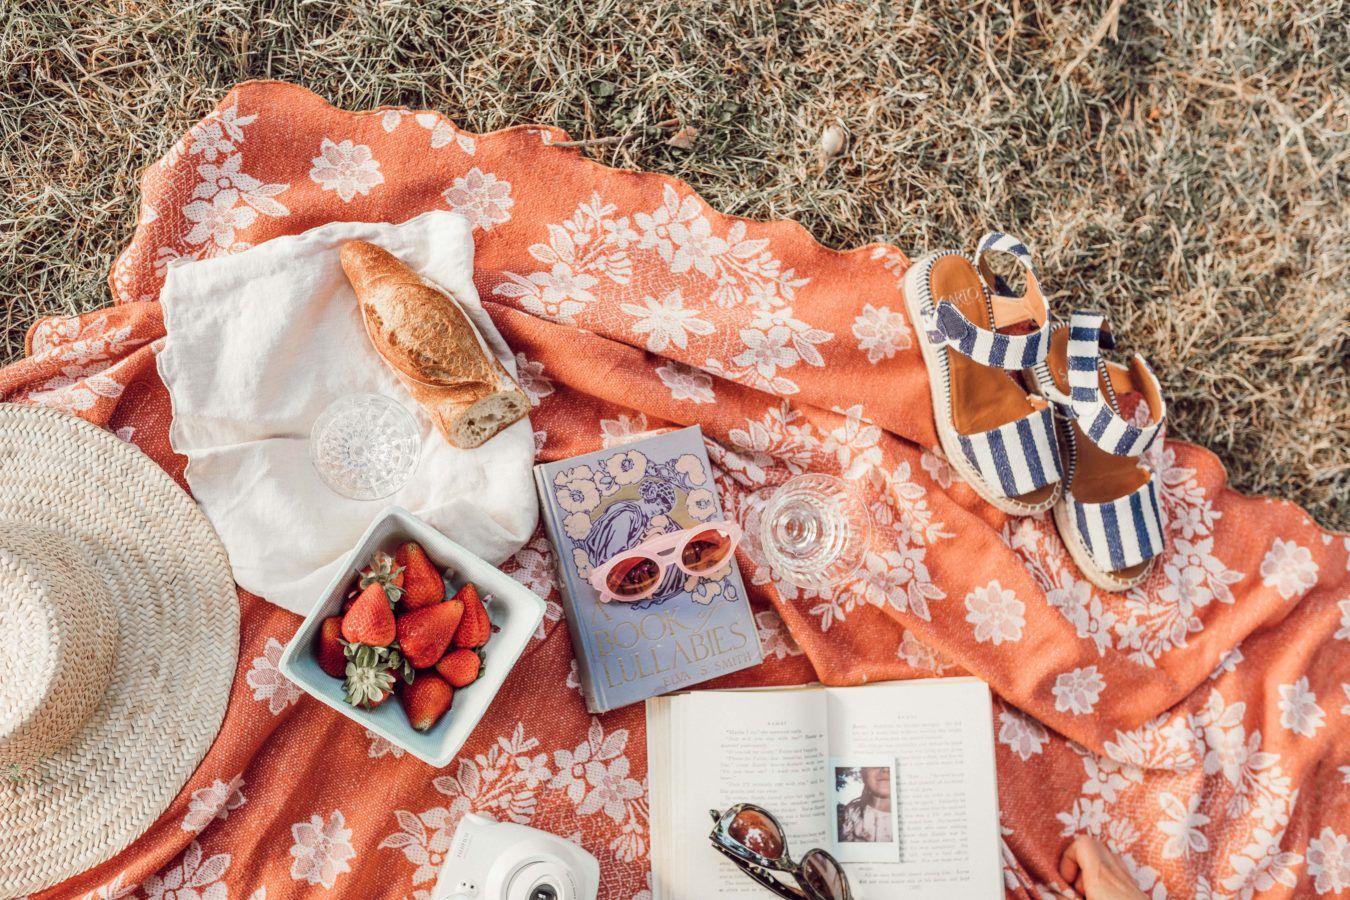 Heading outdoors? Get these easy picnic bundles for the perfect day out